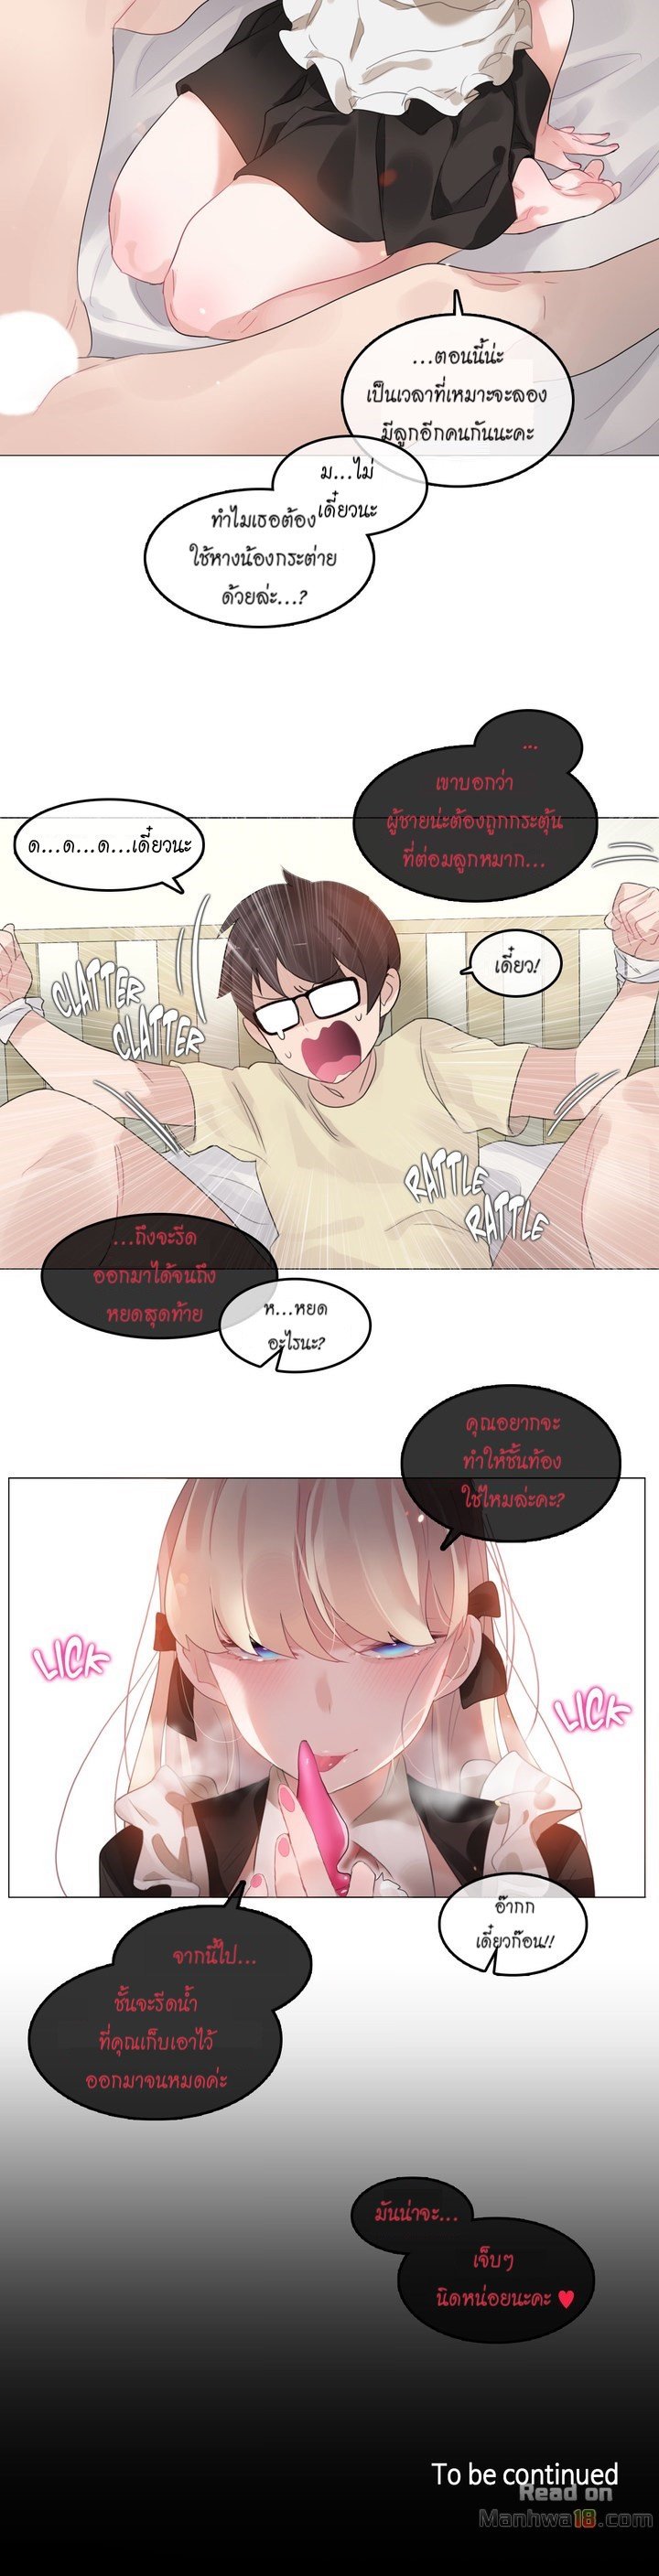 A Pervert’s Daily Life 69 18